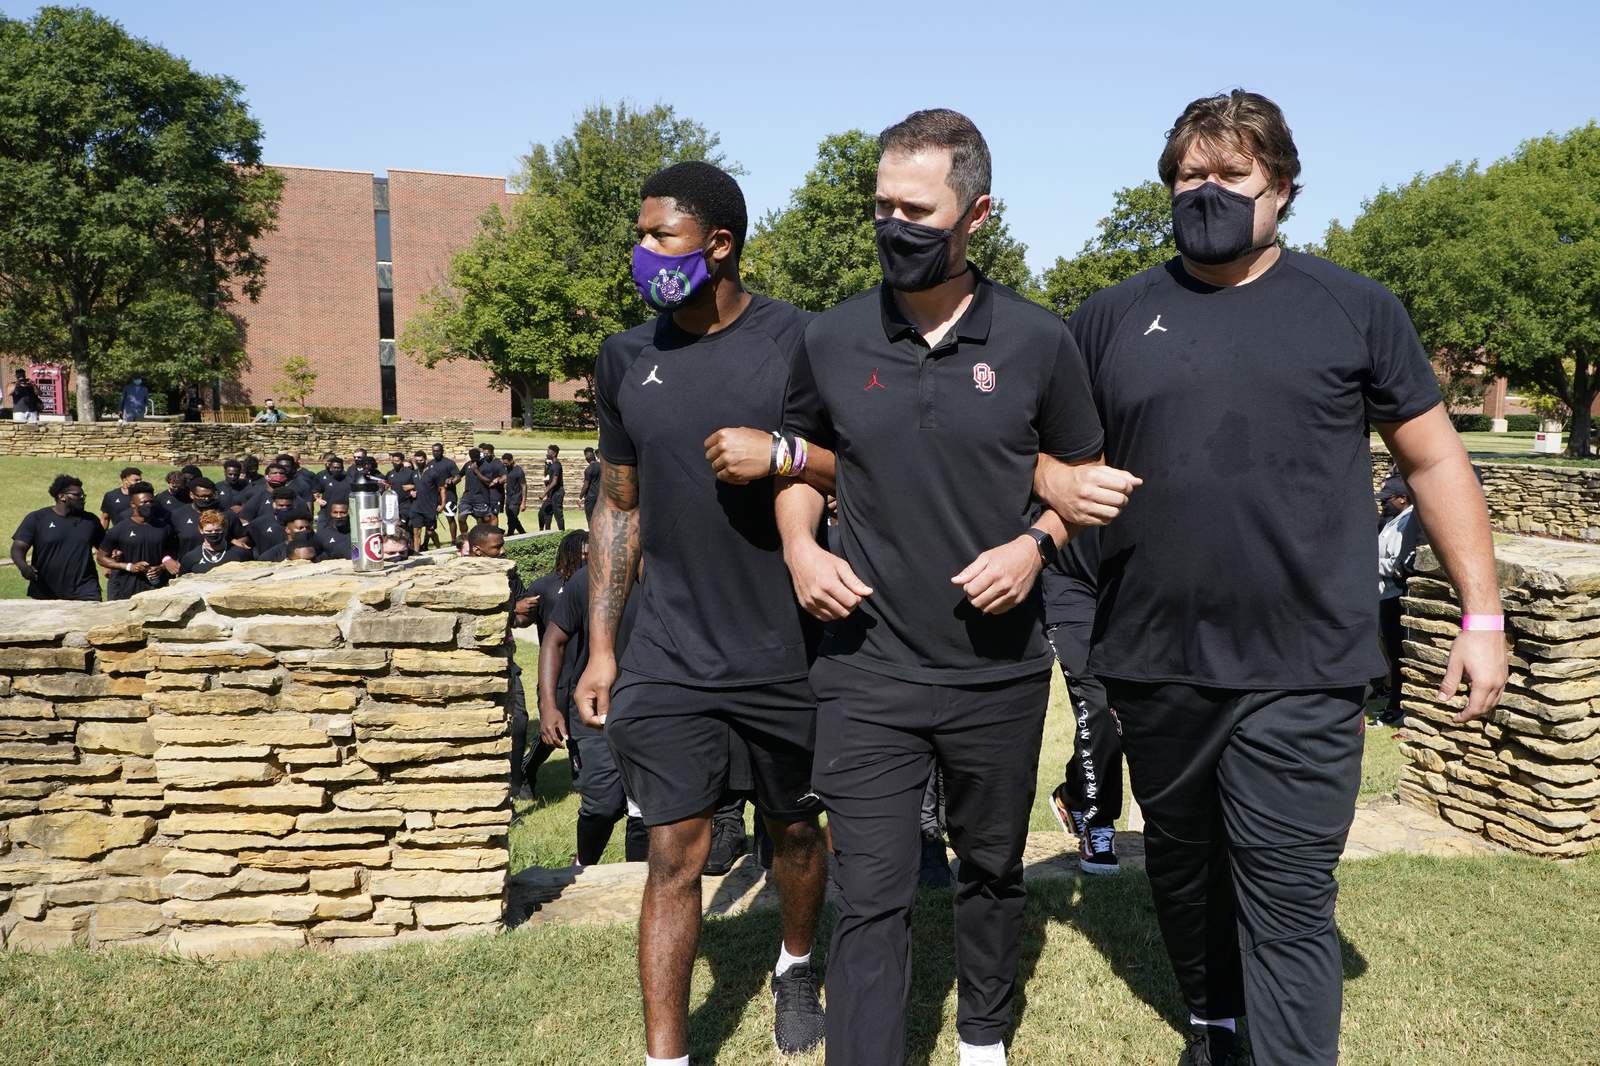 College athletes add voices to those protesting injustice